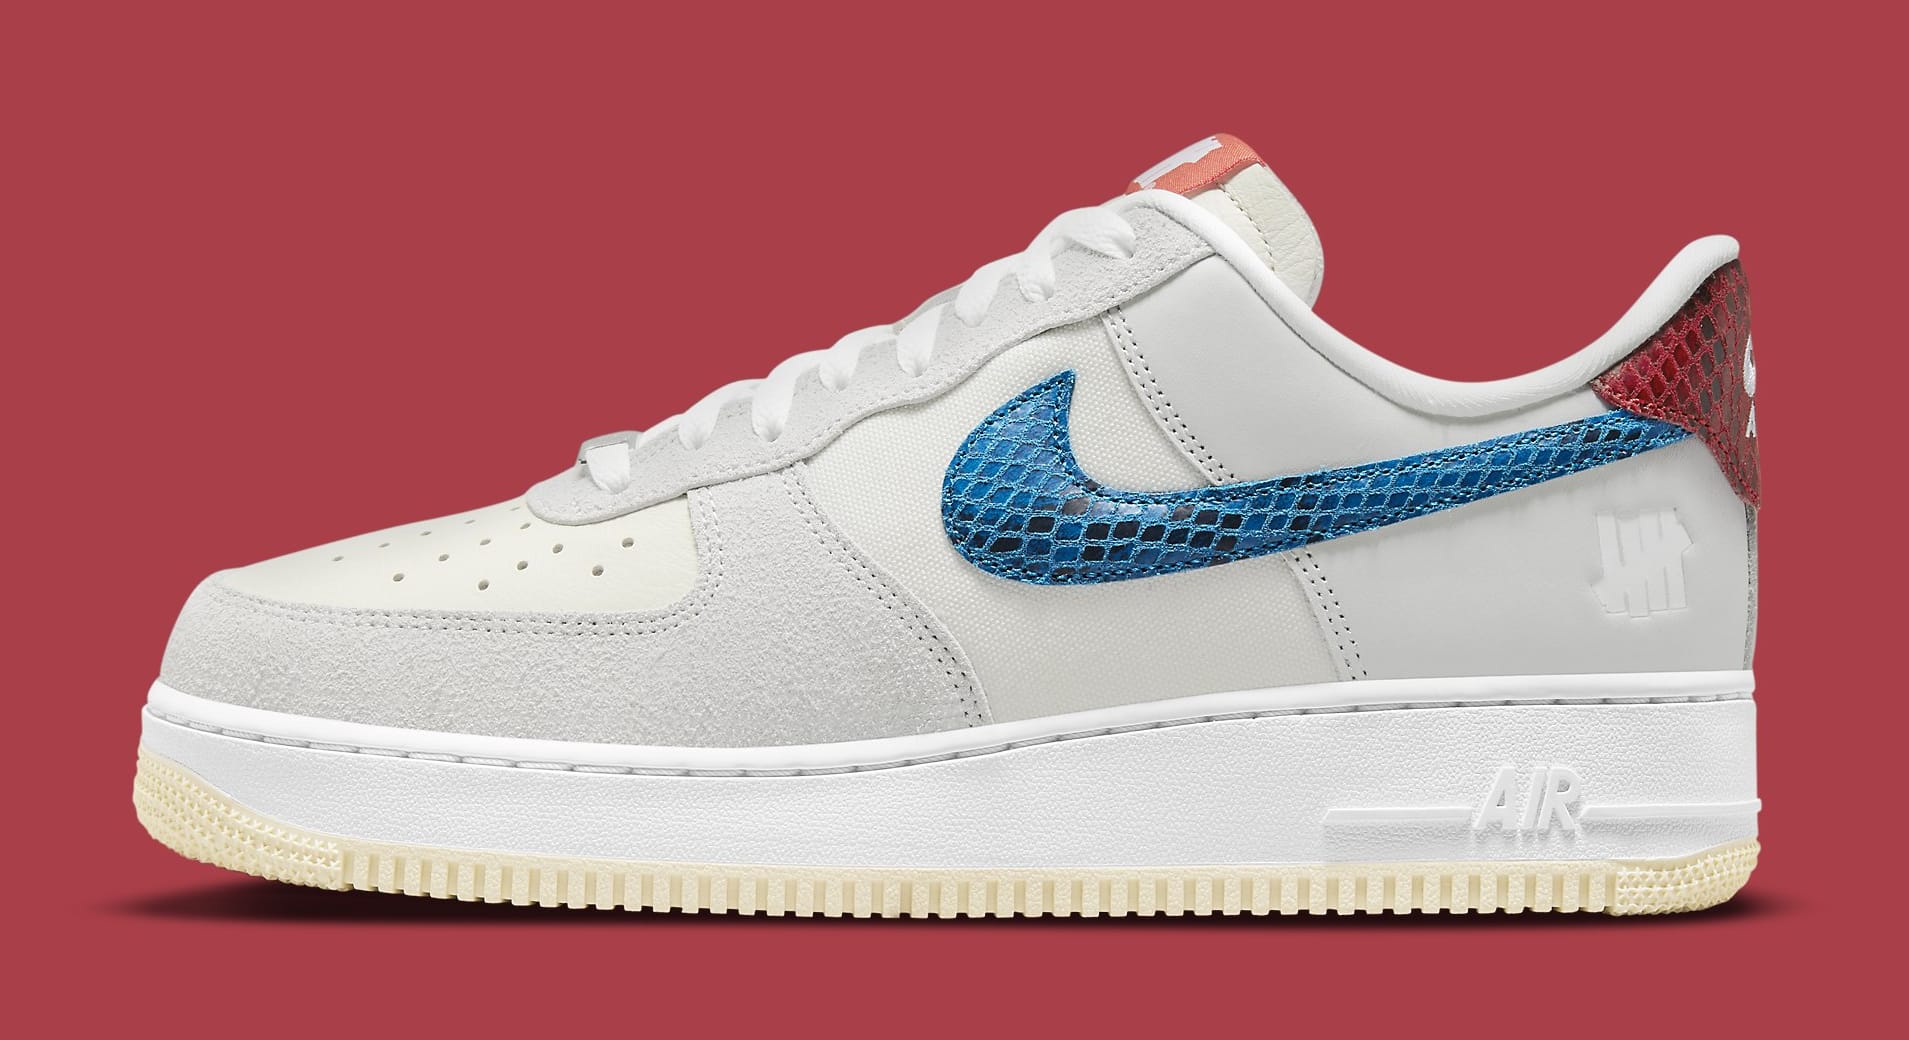 Undefeated x Nike Air Force 1 Low '5 On It' DM8461-001 Lateral